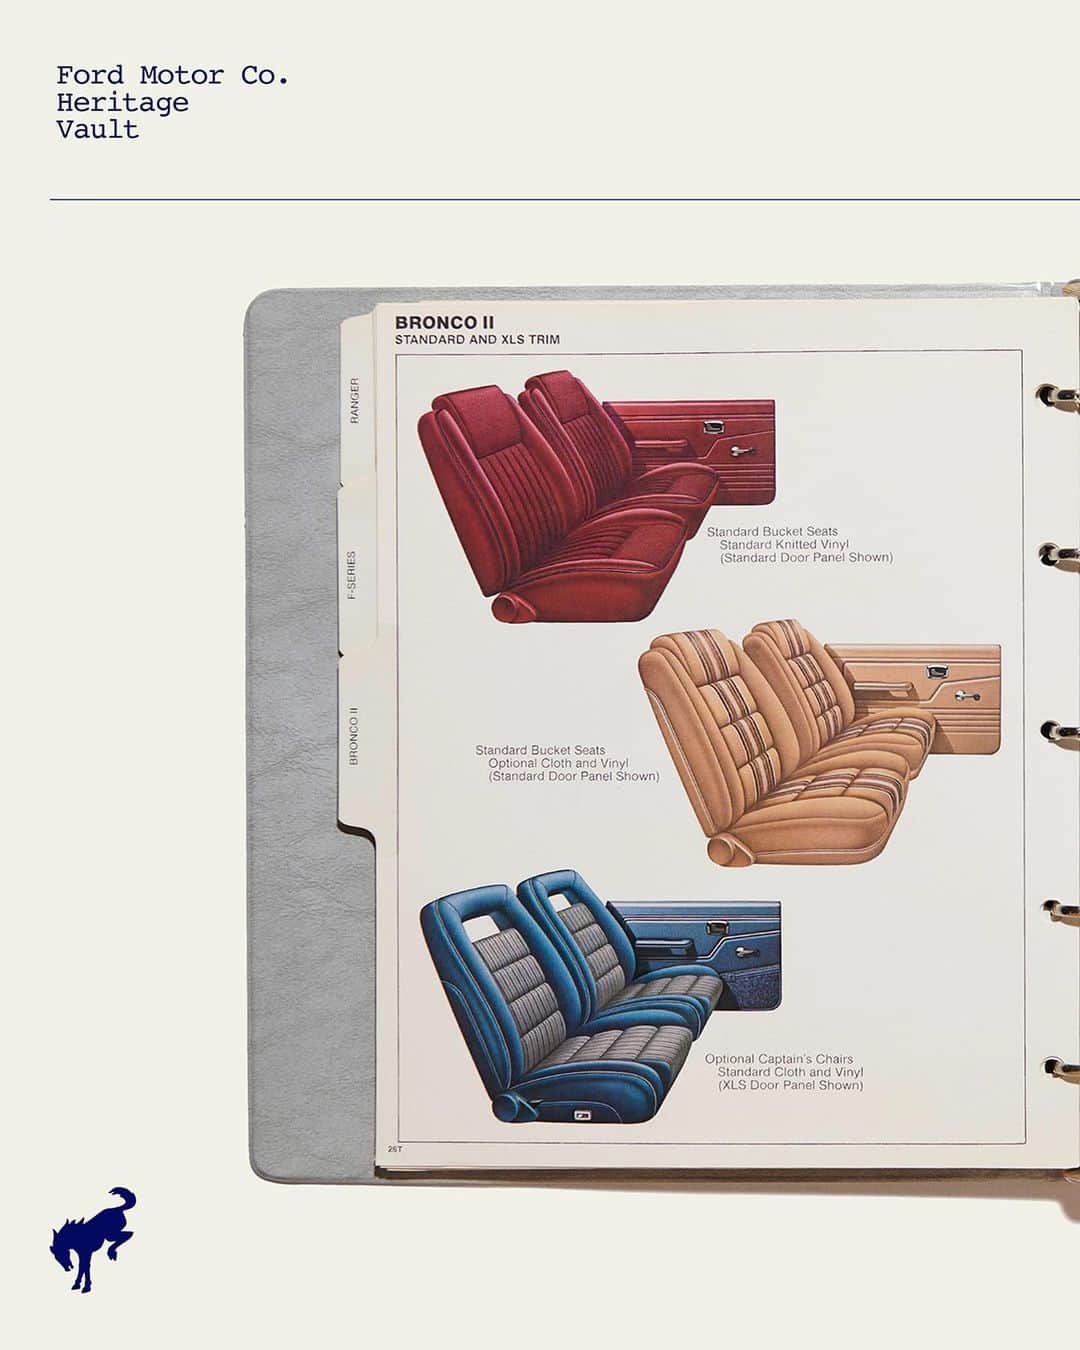 Fordのインスタグラム：「“From the very first mention of the Ford Bronco® in the Long-Range Truck Planning memo of 1962, the Bronco has been a cousin to the Truck Division. This fabric/interior guide from 1984 shows the evolving color palette from the more austere offerings when the Bronco was launched into the vibrant 80s.” —Ted Ryan, Ford Archives & Heritage Brand Manager  Use the link in bio to see more of the Ford Heritage Vault.  Disclaimer: Archival footage shown. Claims based on historical data.」